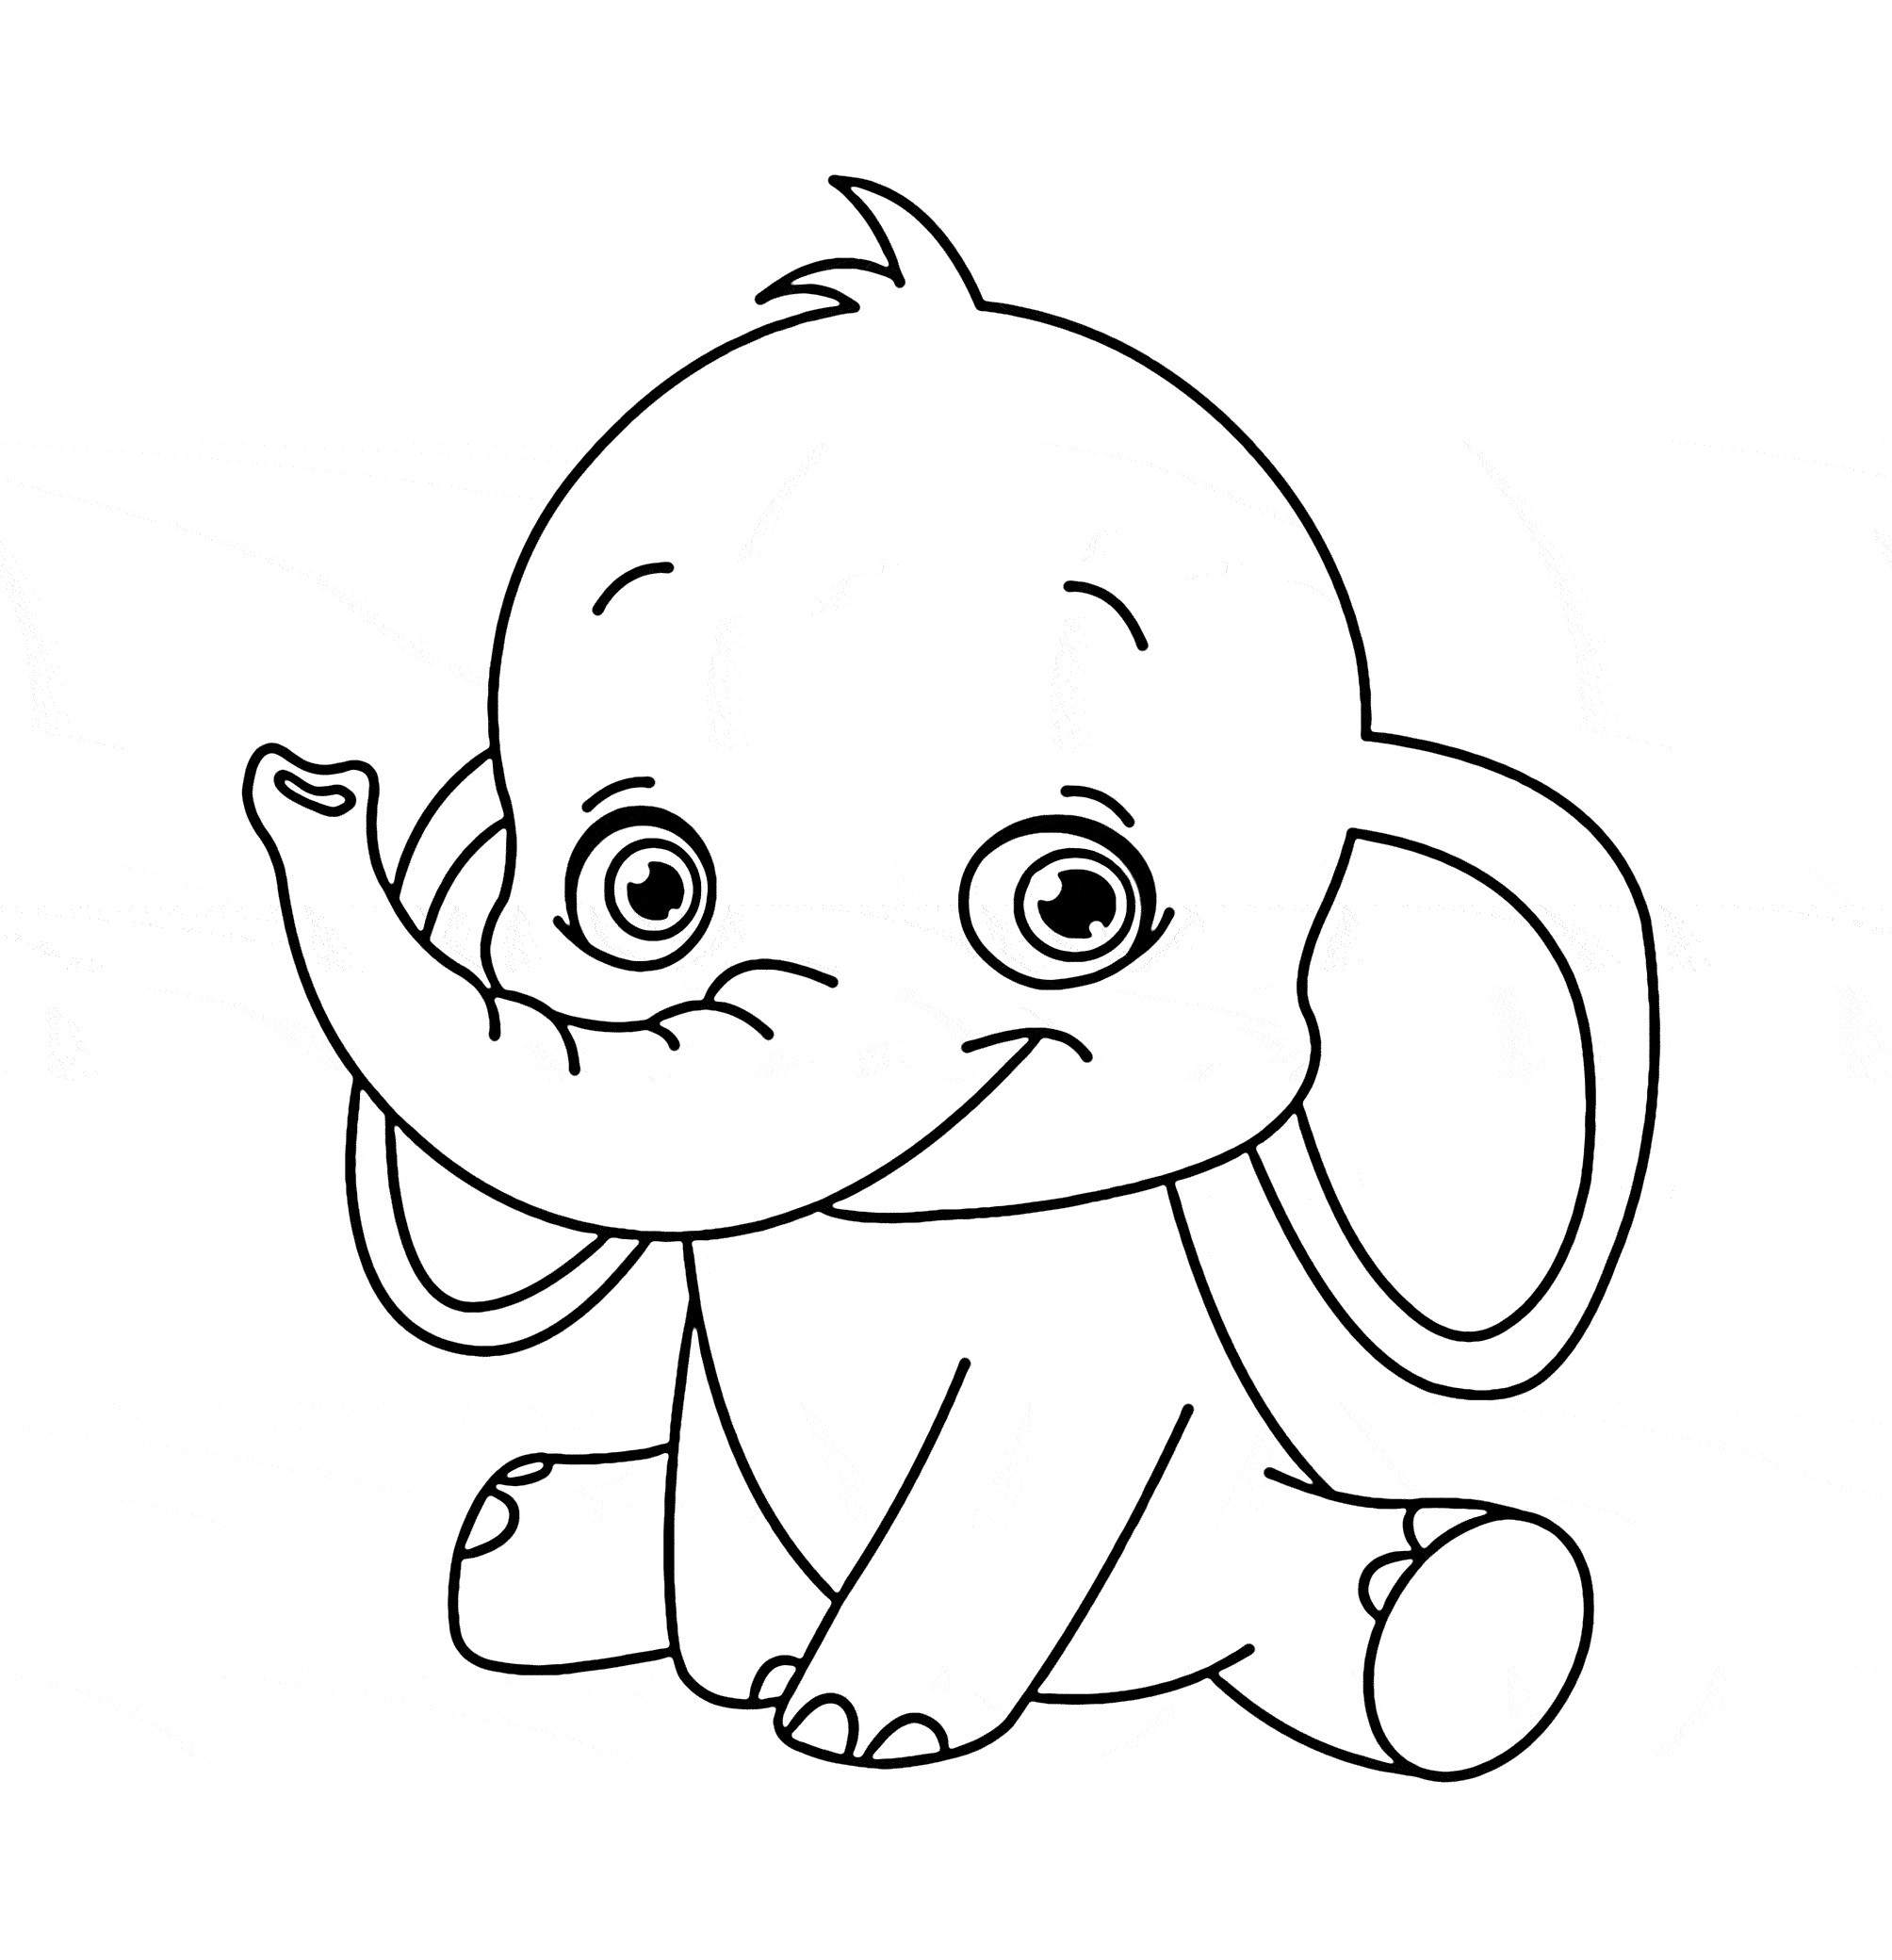 Coloring Pages Baby Monkey Fresh Get This Baby Monkey Coloring Pages Refrence Cute Baby Elephant